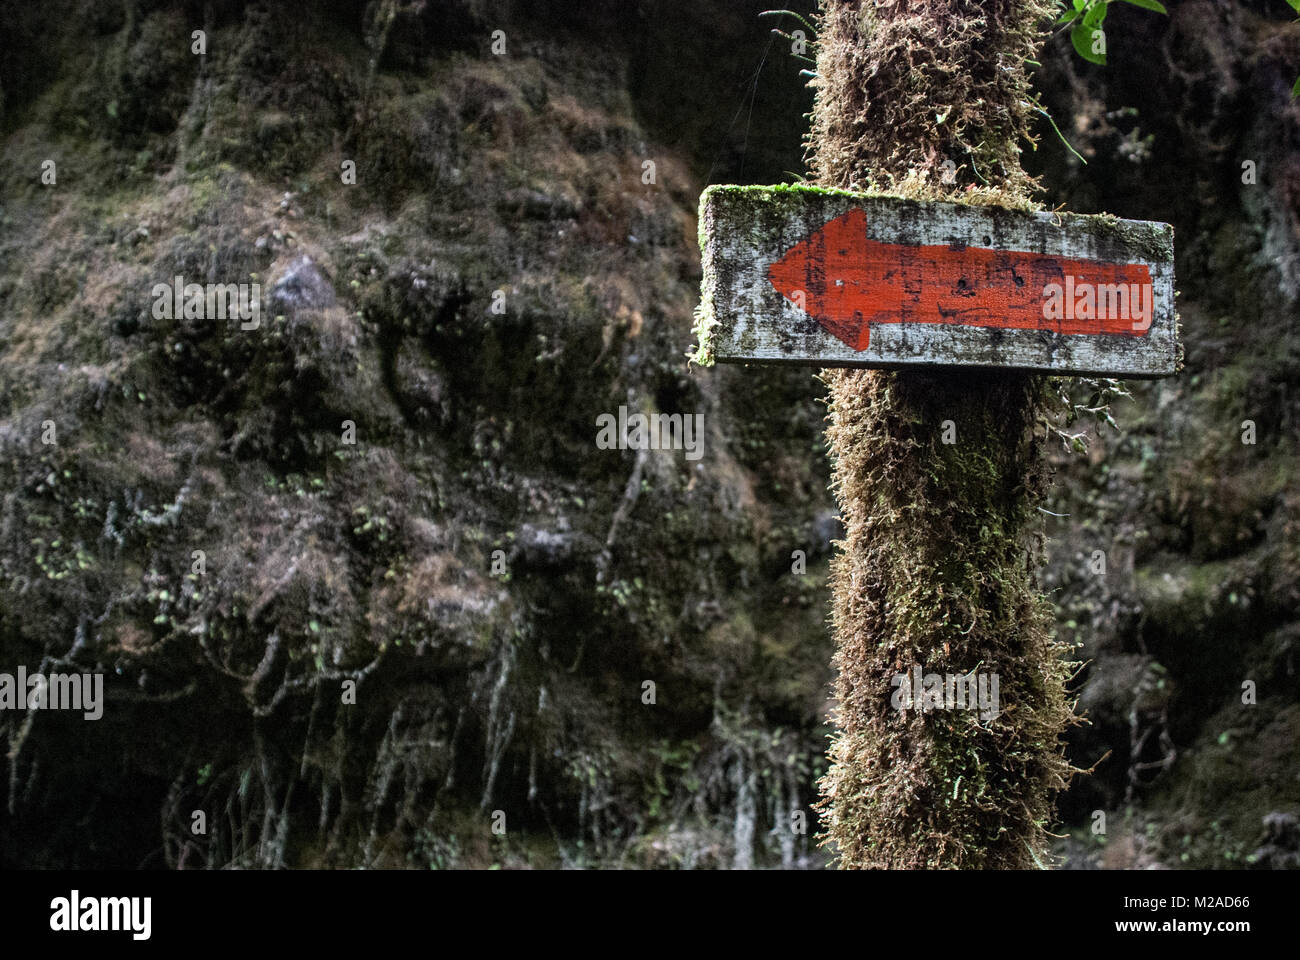 A moss-covered, weathered sign with a painted red arrow in the Colombian countryside Stock Photo